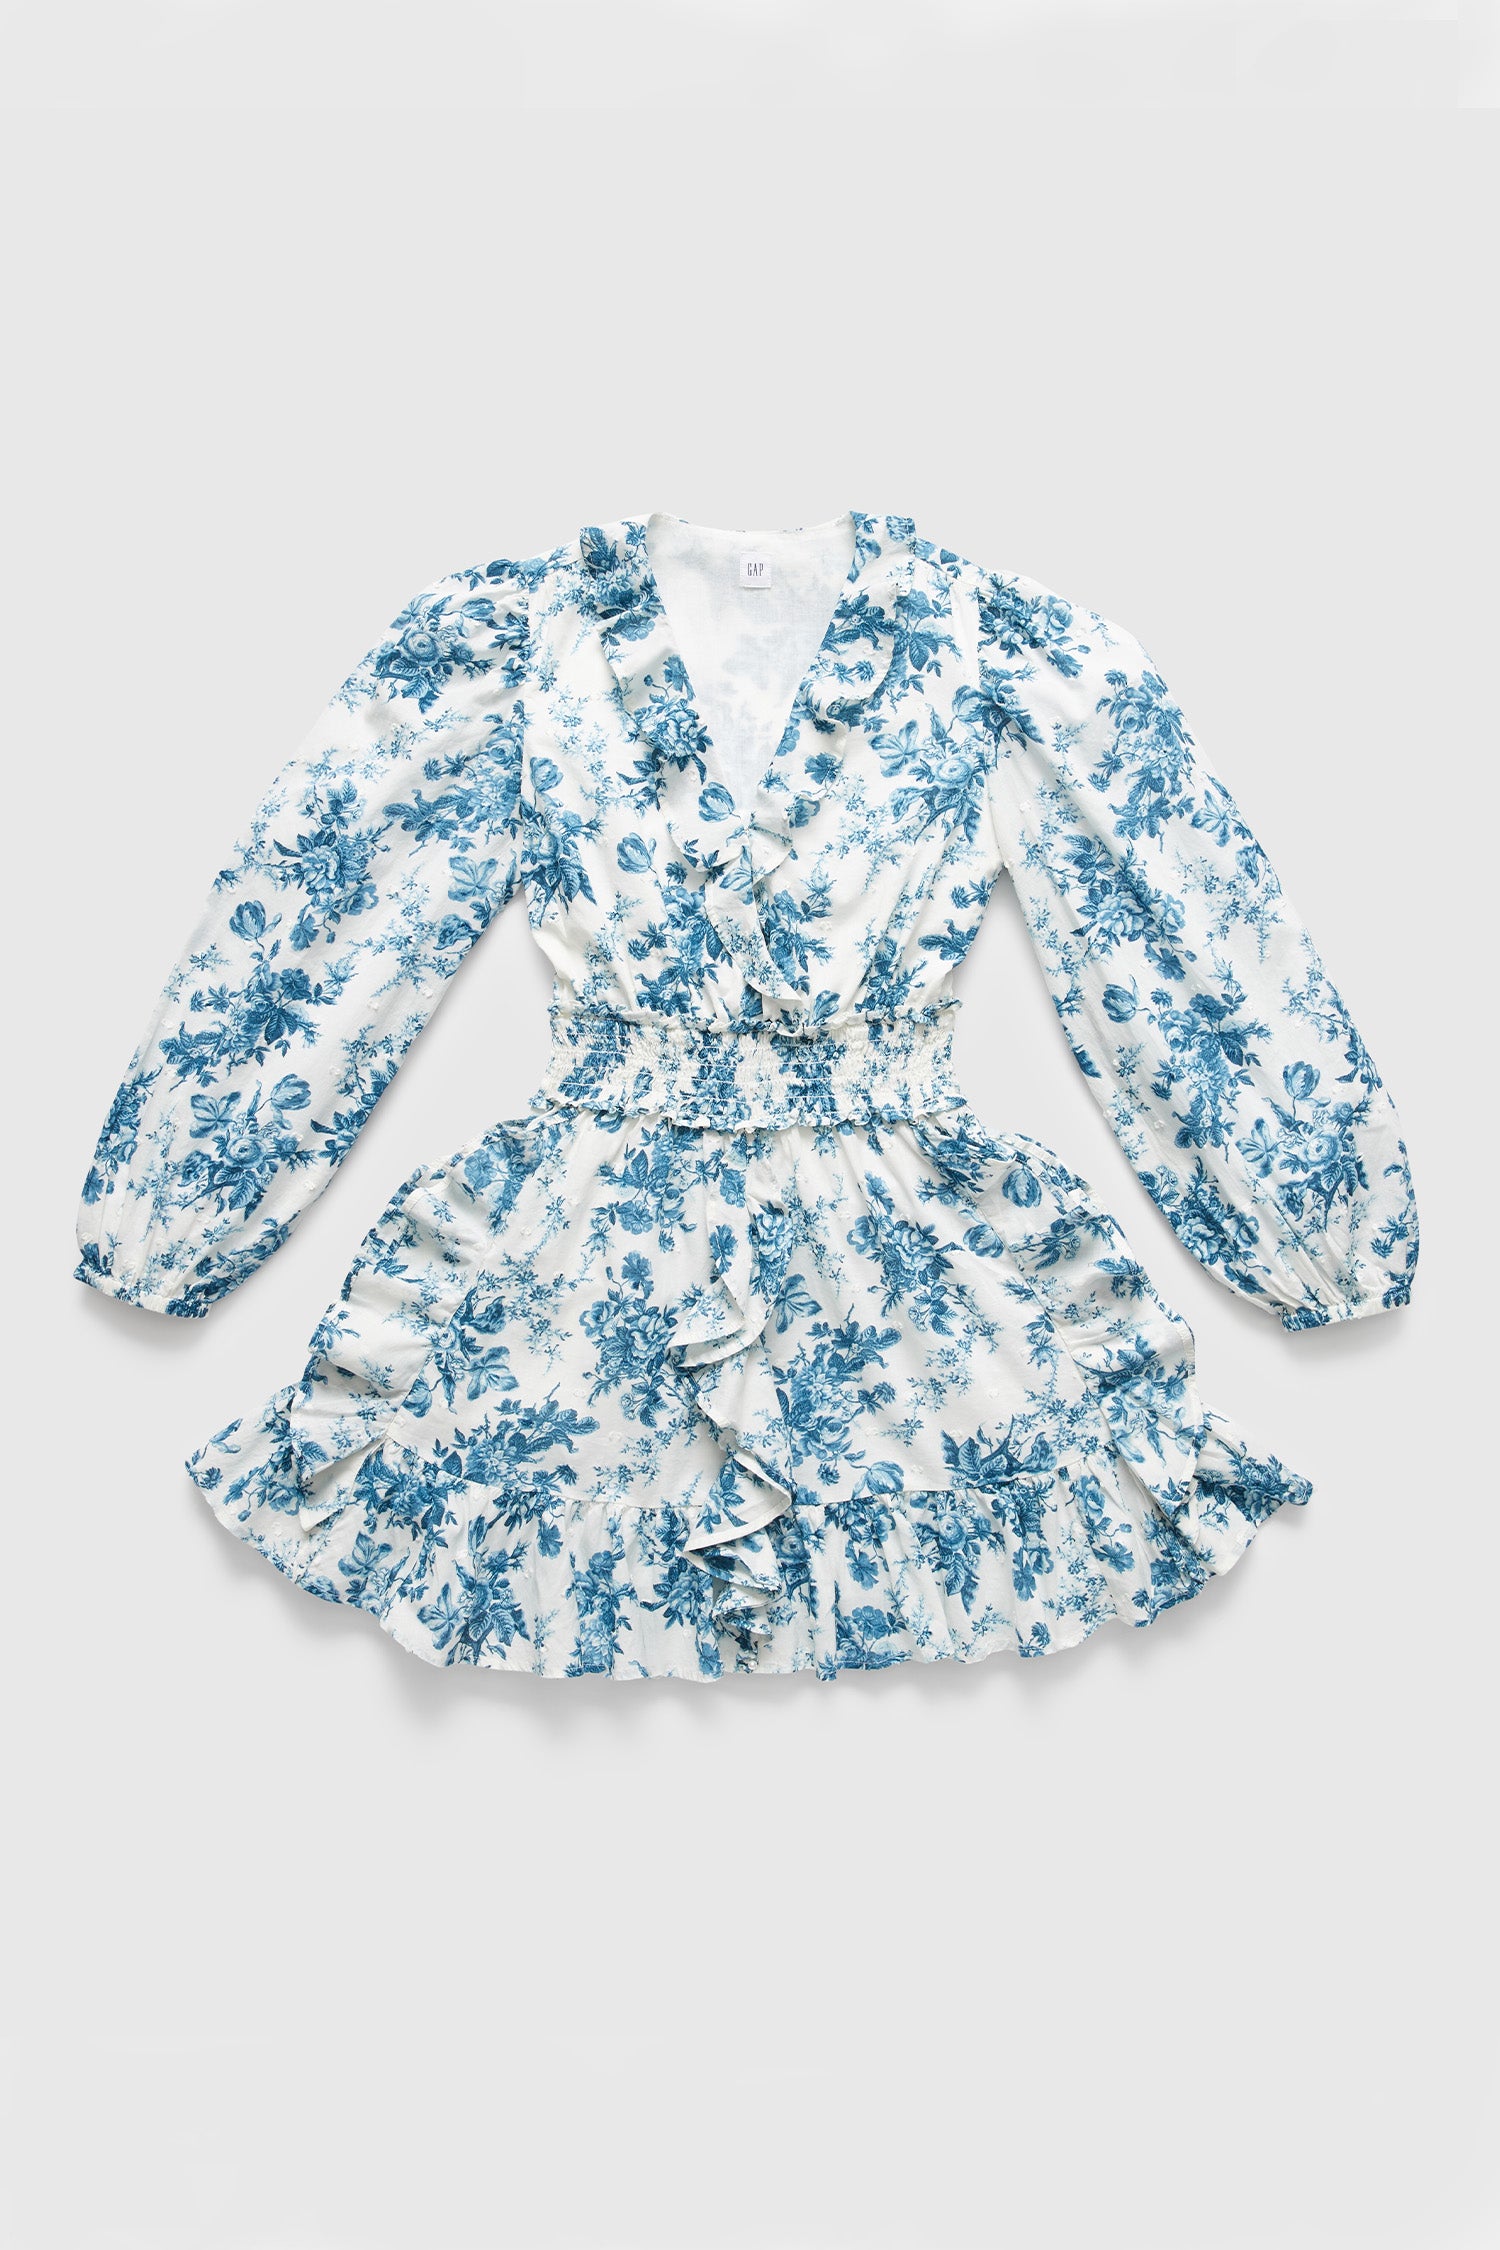 White and blue floral mini dress with puff long sleeves, ruffled hem, and smocked waist